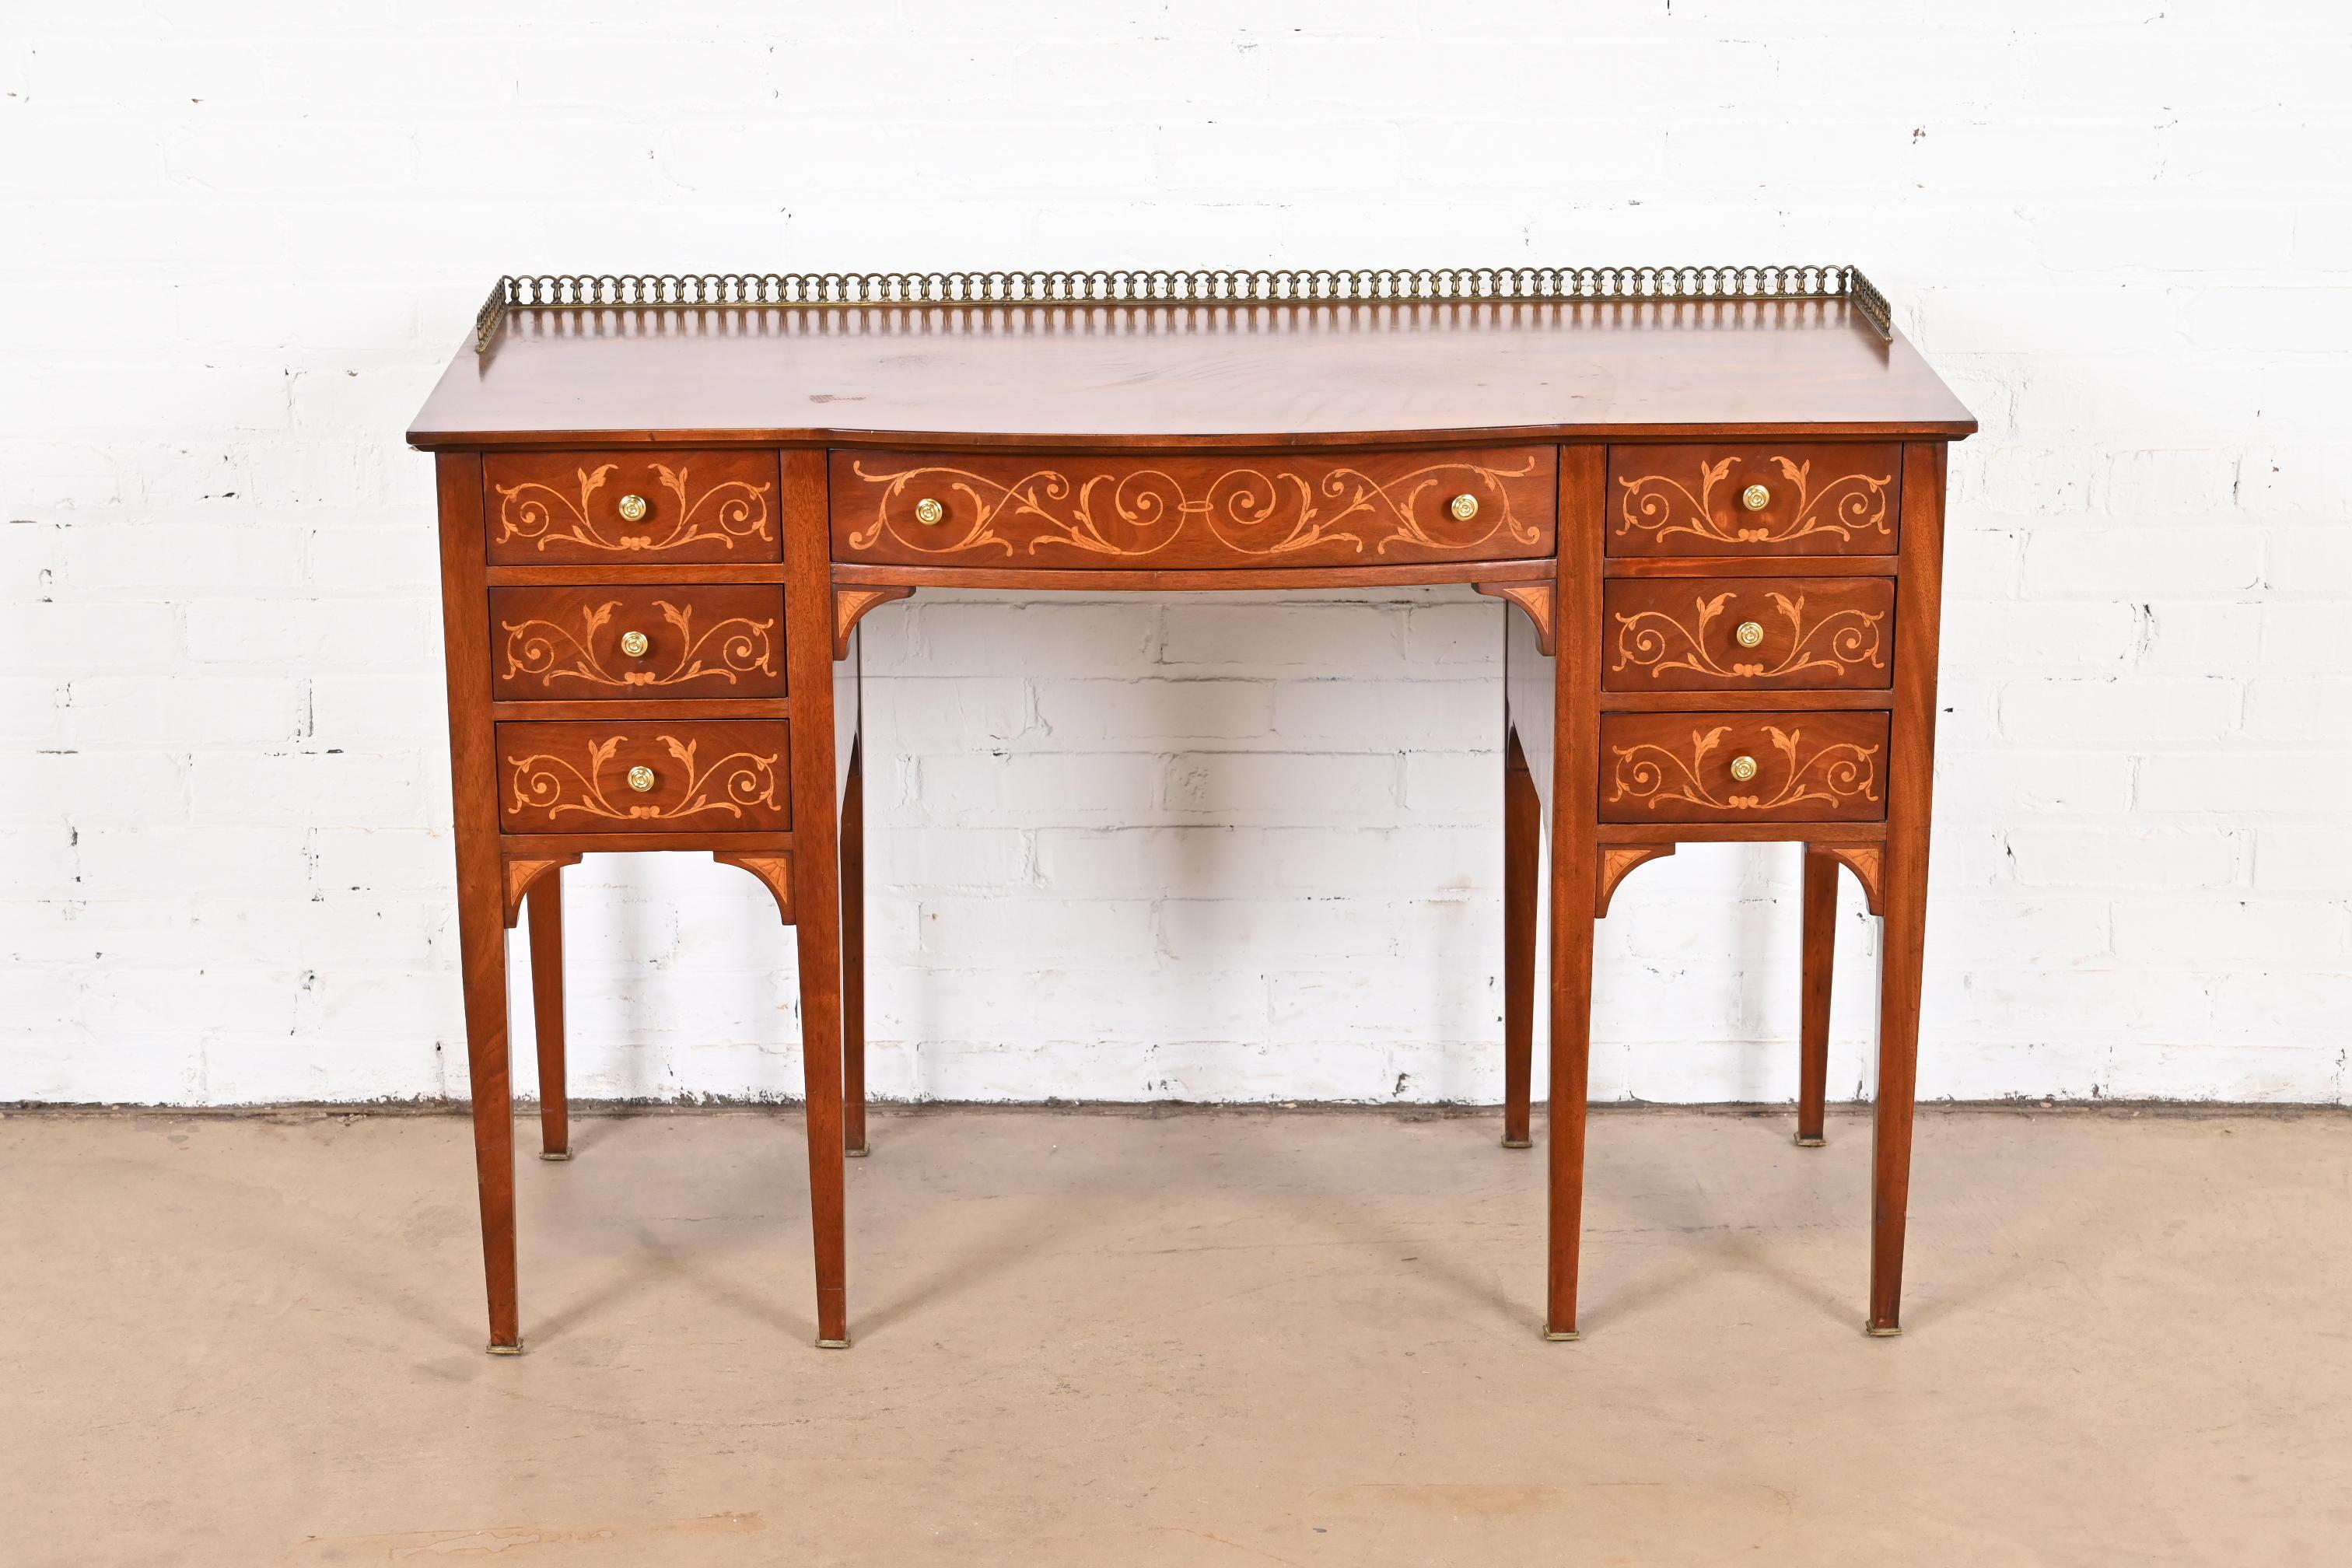 American French Regency Louis XVI Mahogany Inlaid Marquetry Vanity by Johnson Furniture For Sale